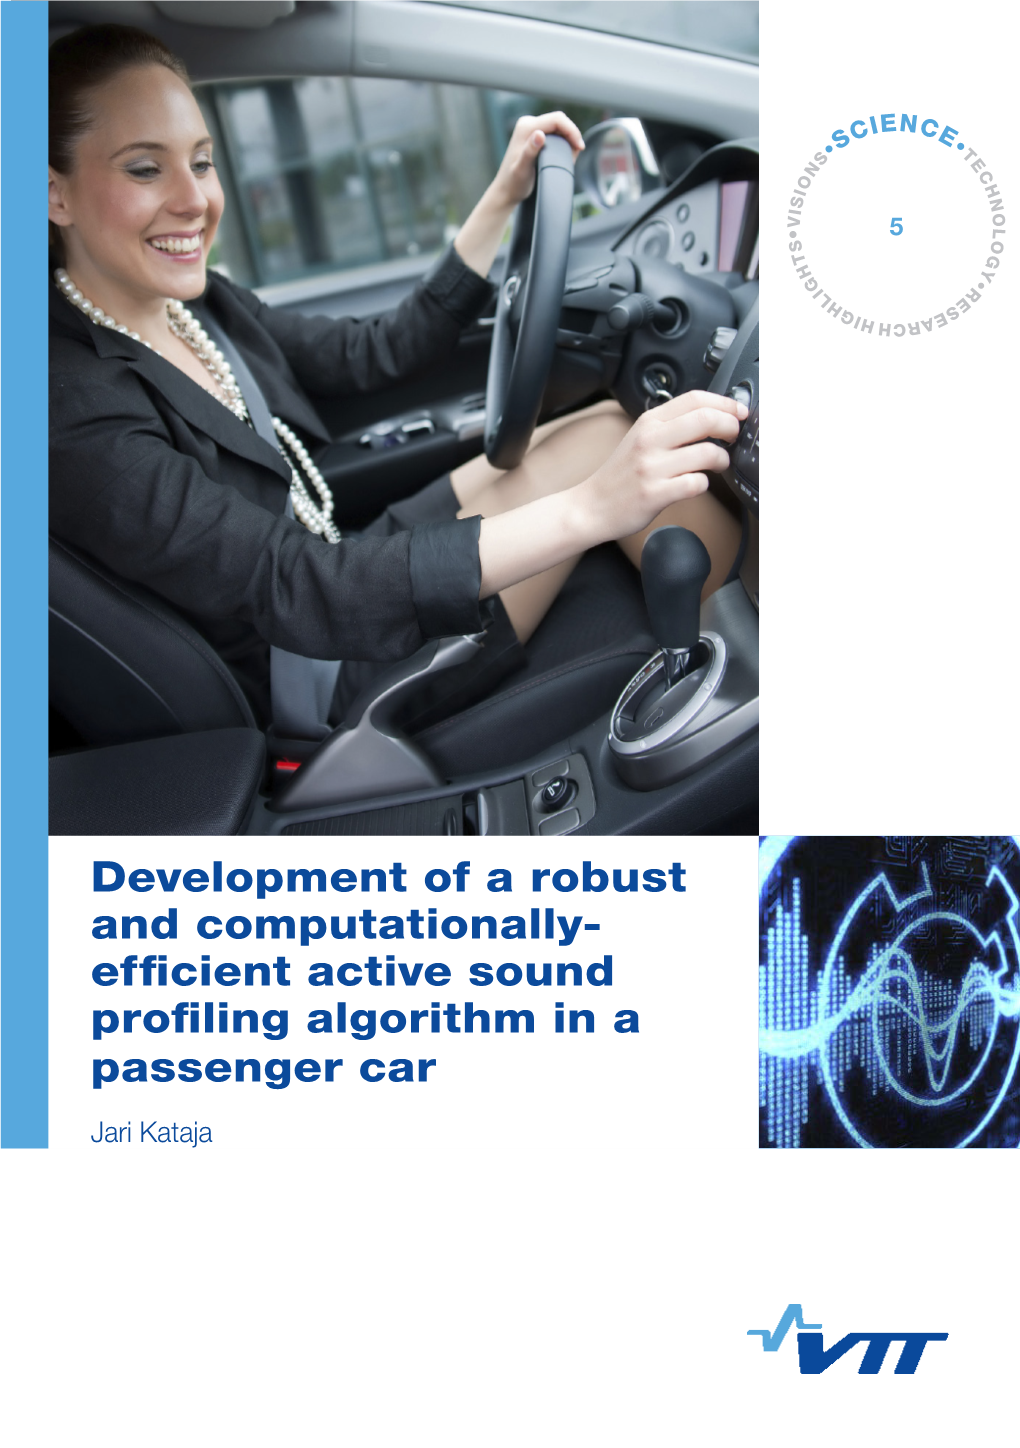 Development of a Robust and Computationally-Efficient Active Sound Profiling Algorithm in a Passenger Car